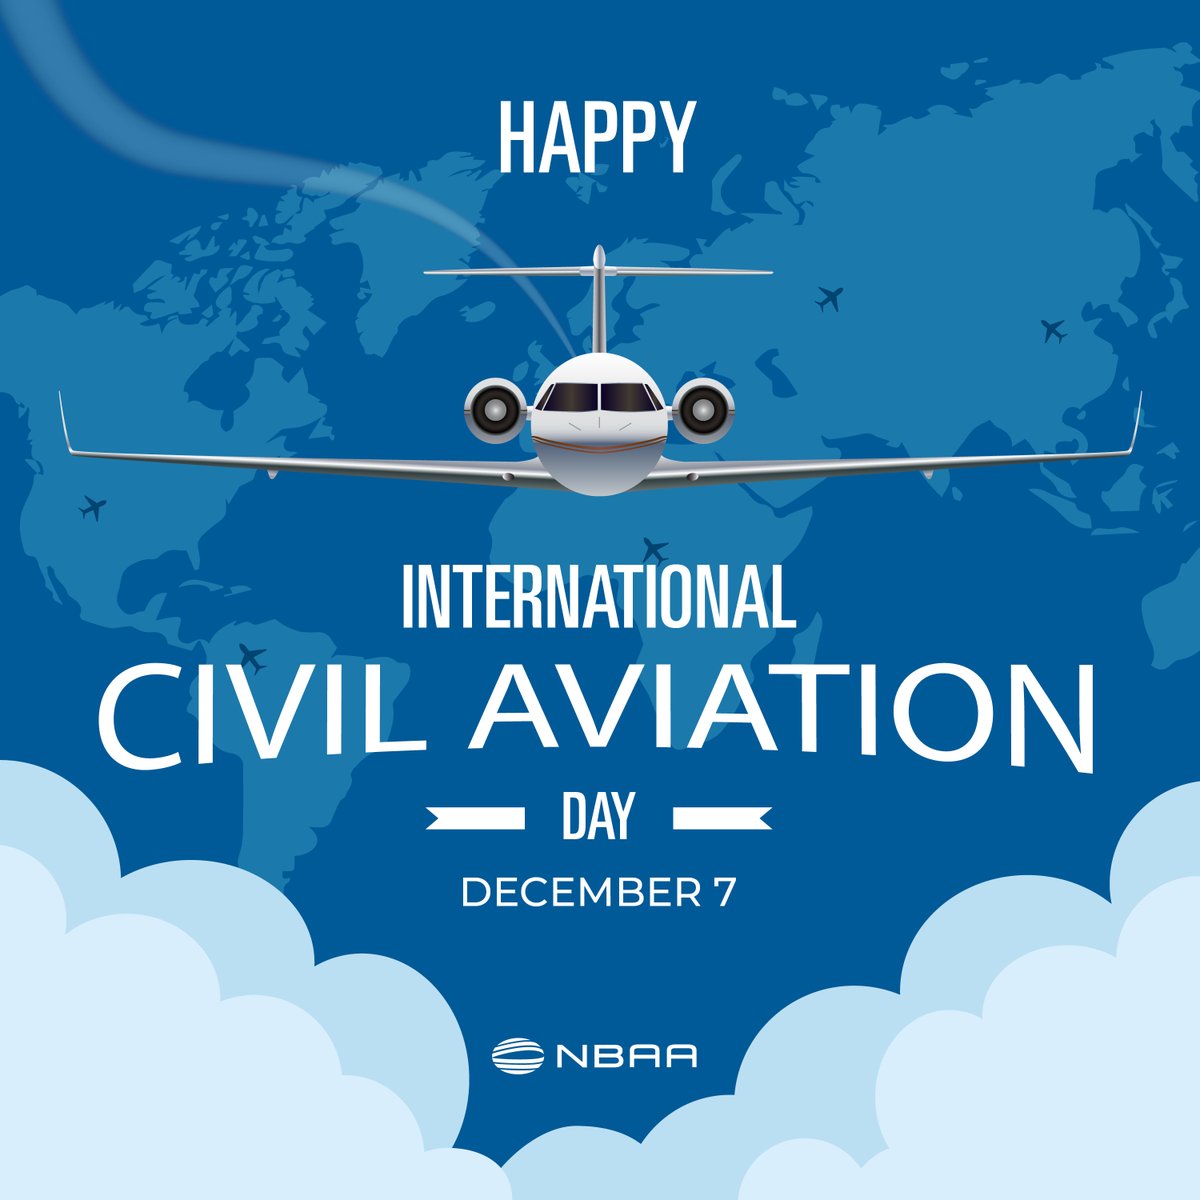 Today, we celebrate #InternationalCivilAviationDay, embracing the #BizAv mission to help businesses thrive across the US and around the globe.